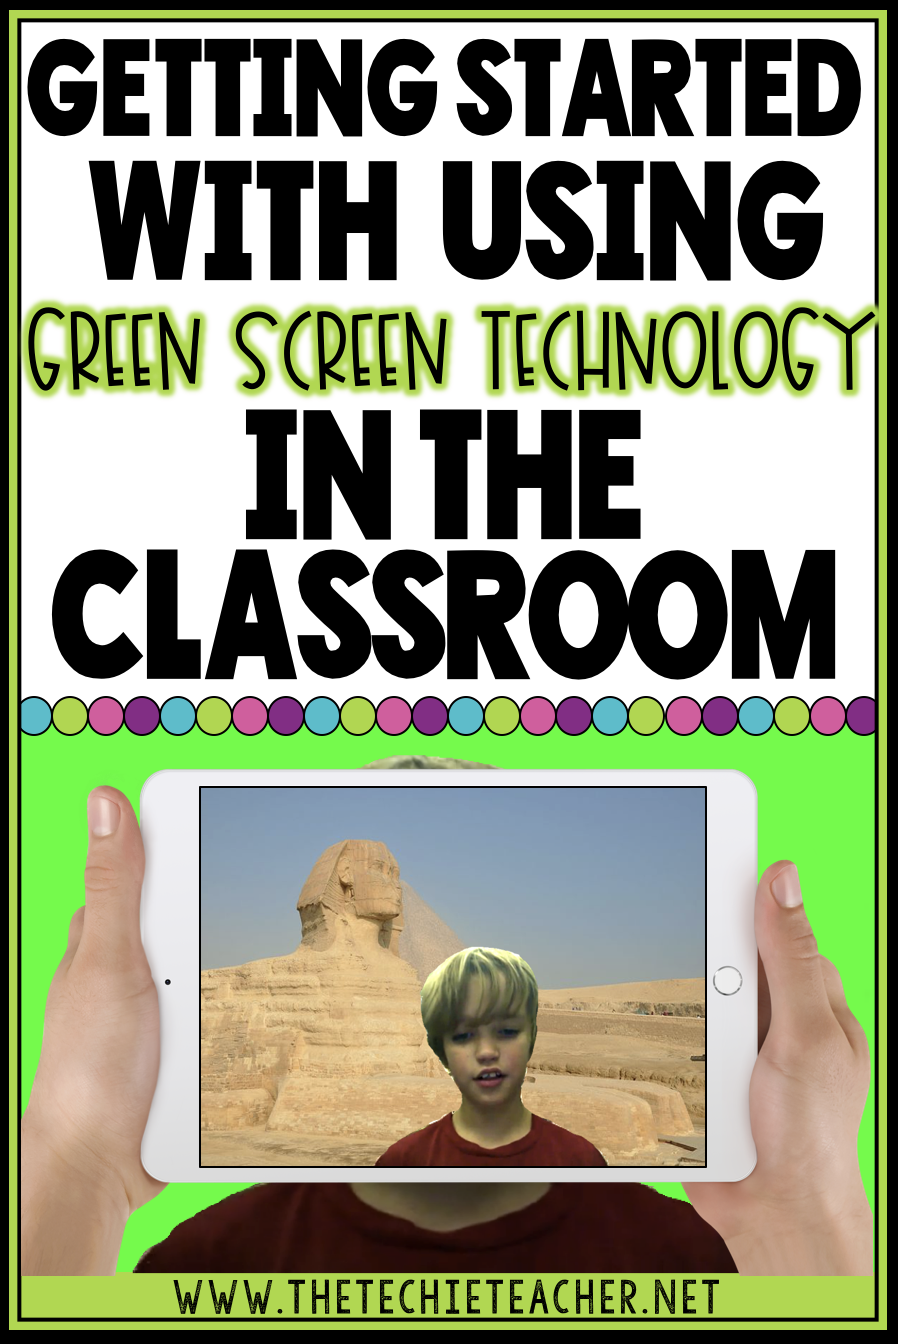 Getting Started with Using Green Screen Technology in the Classroom